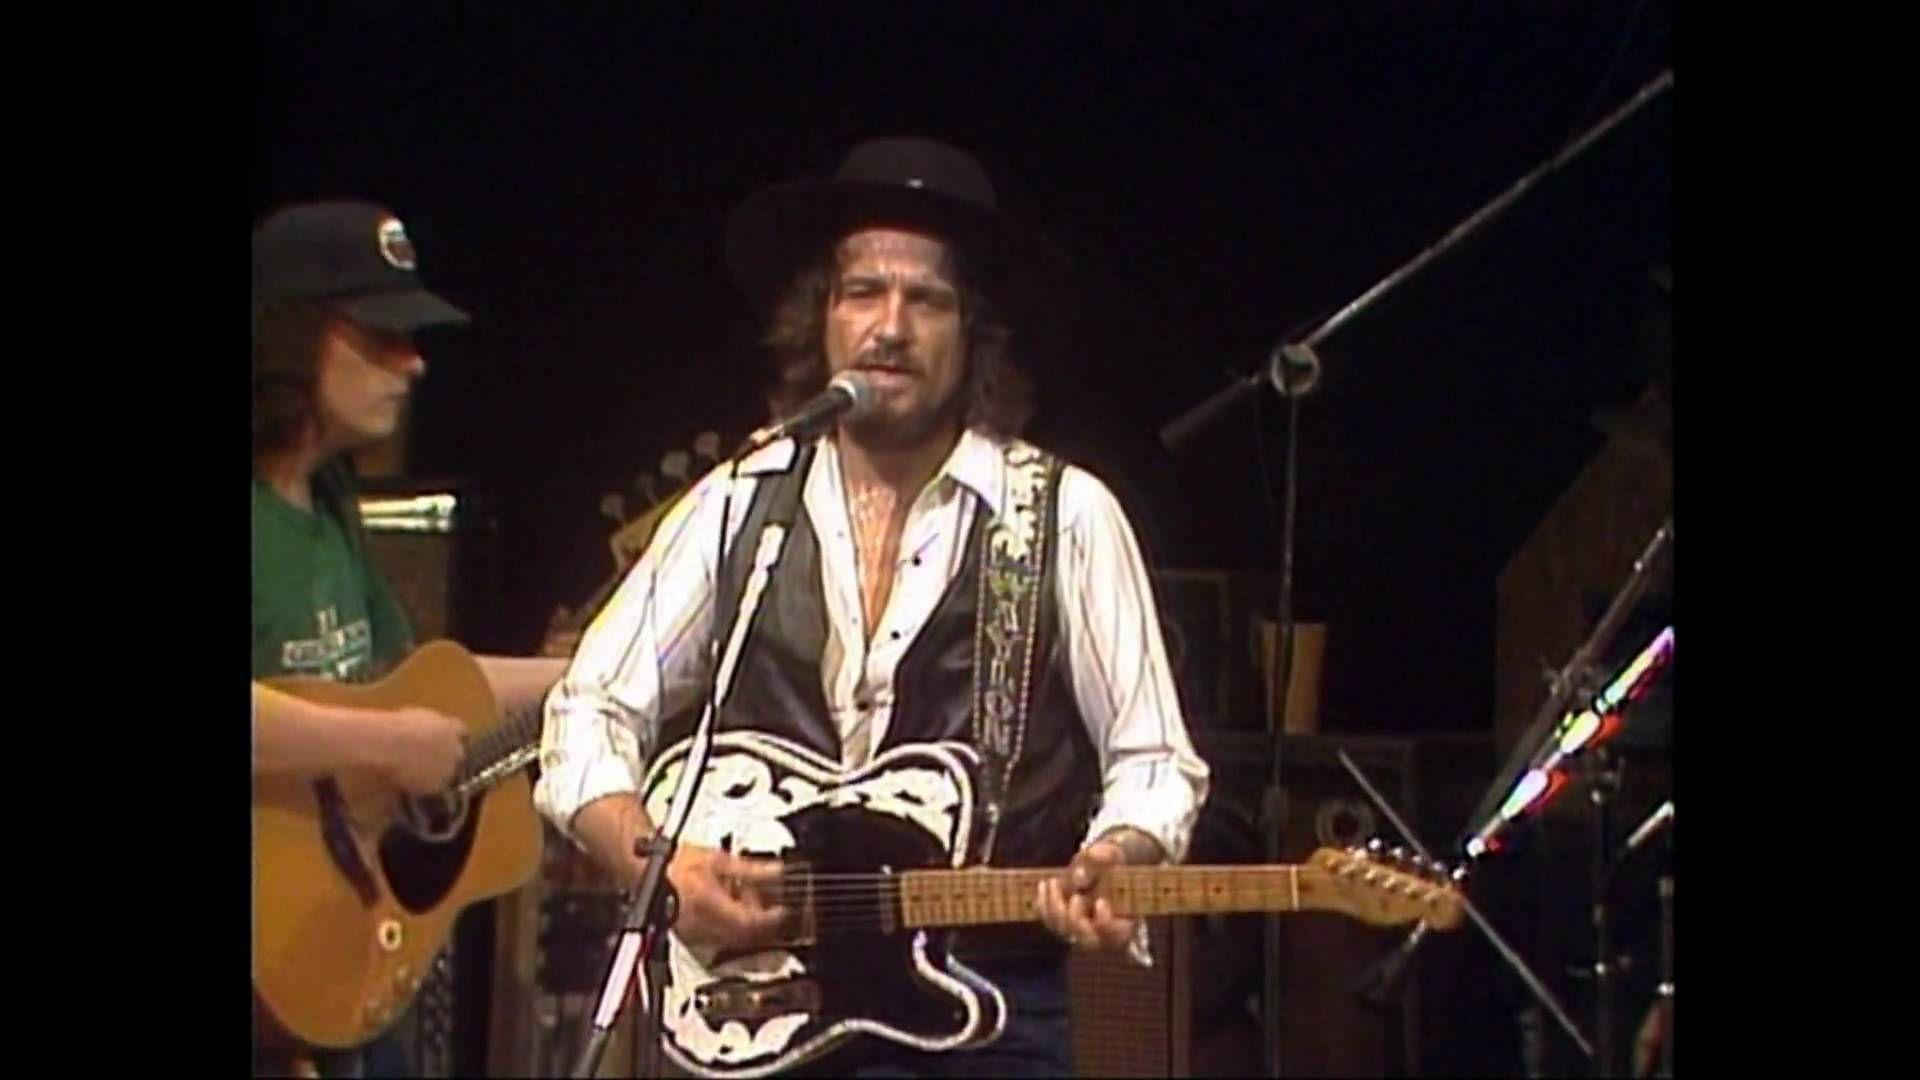 Thanks for the music and the memories Waylon. There will never be